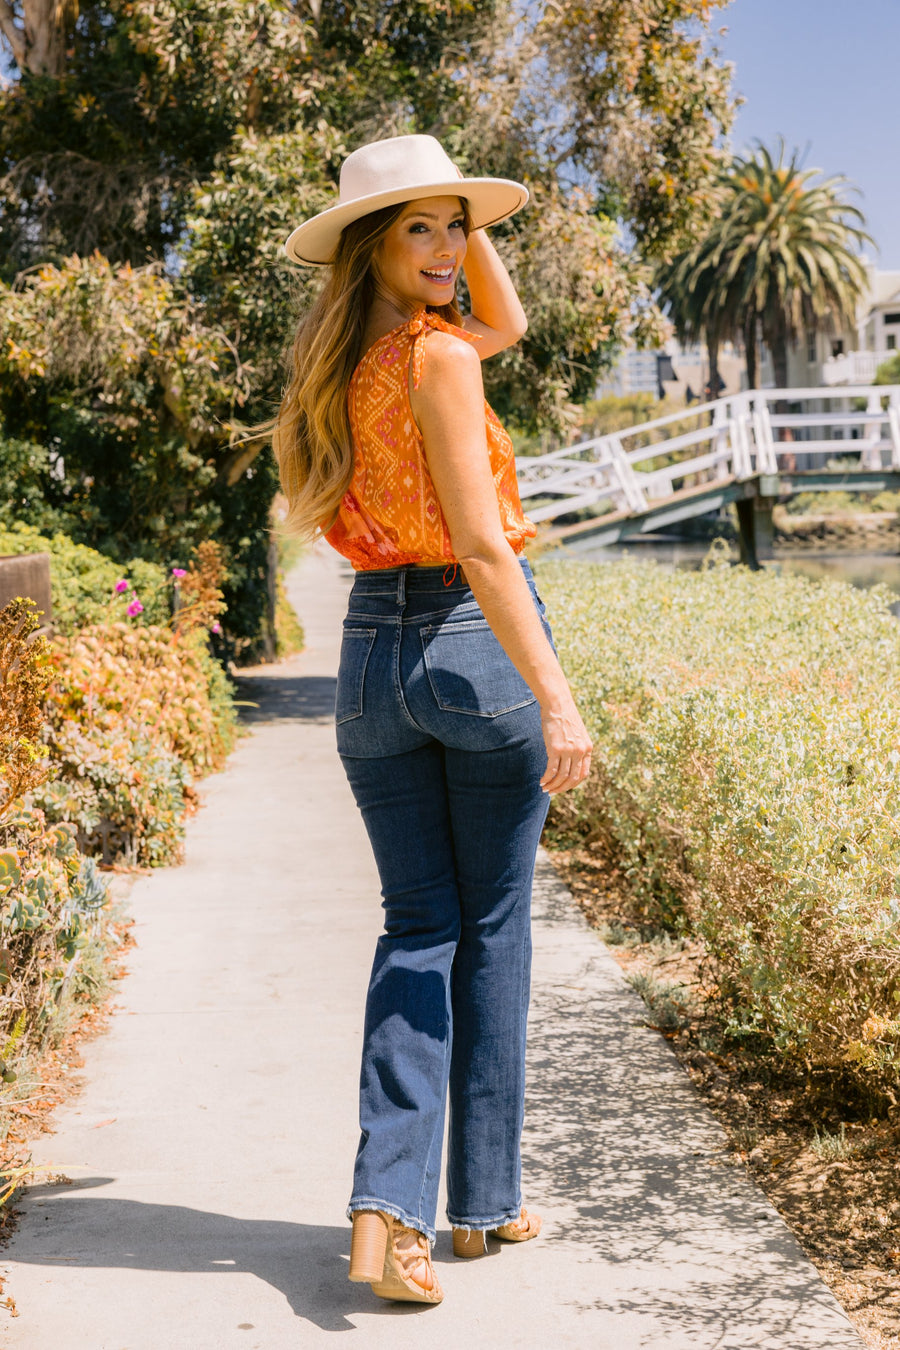 Delilah Classic Bootcut